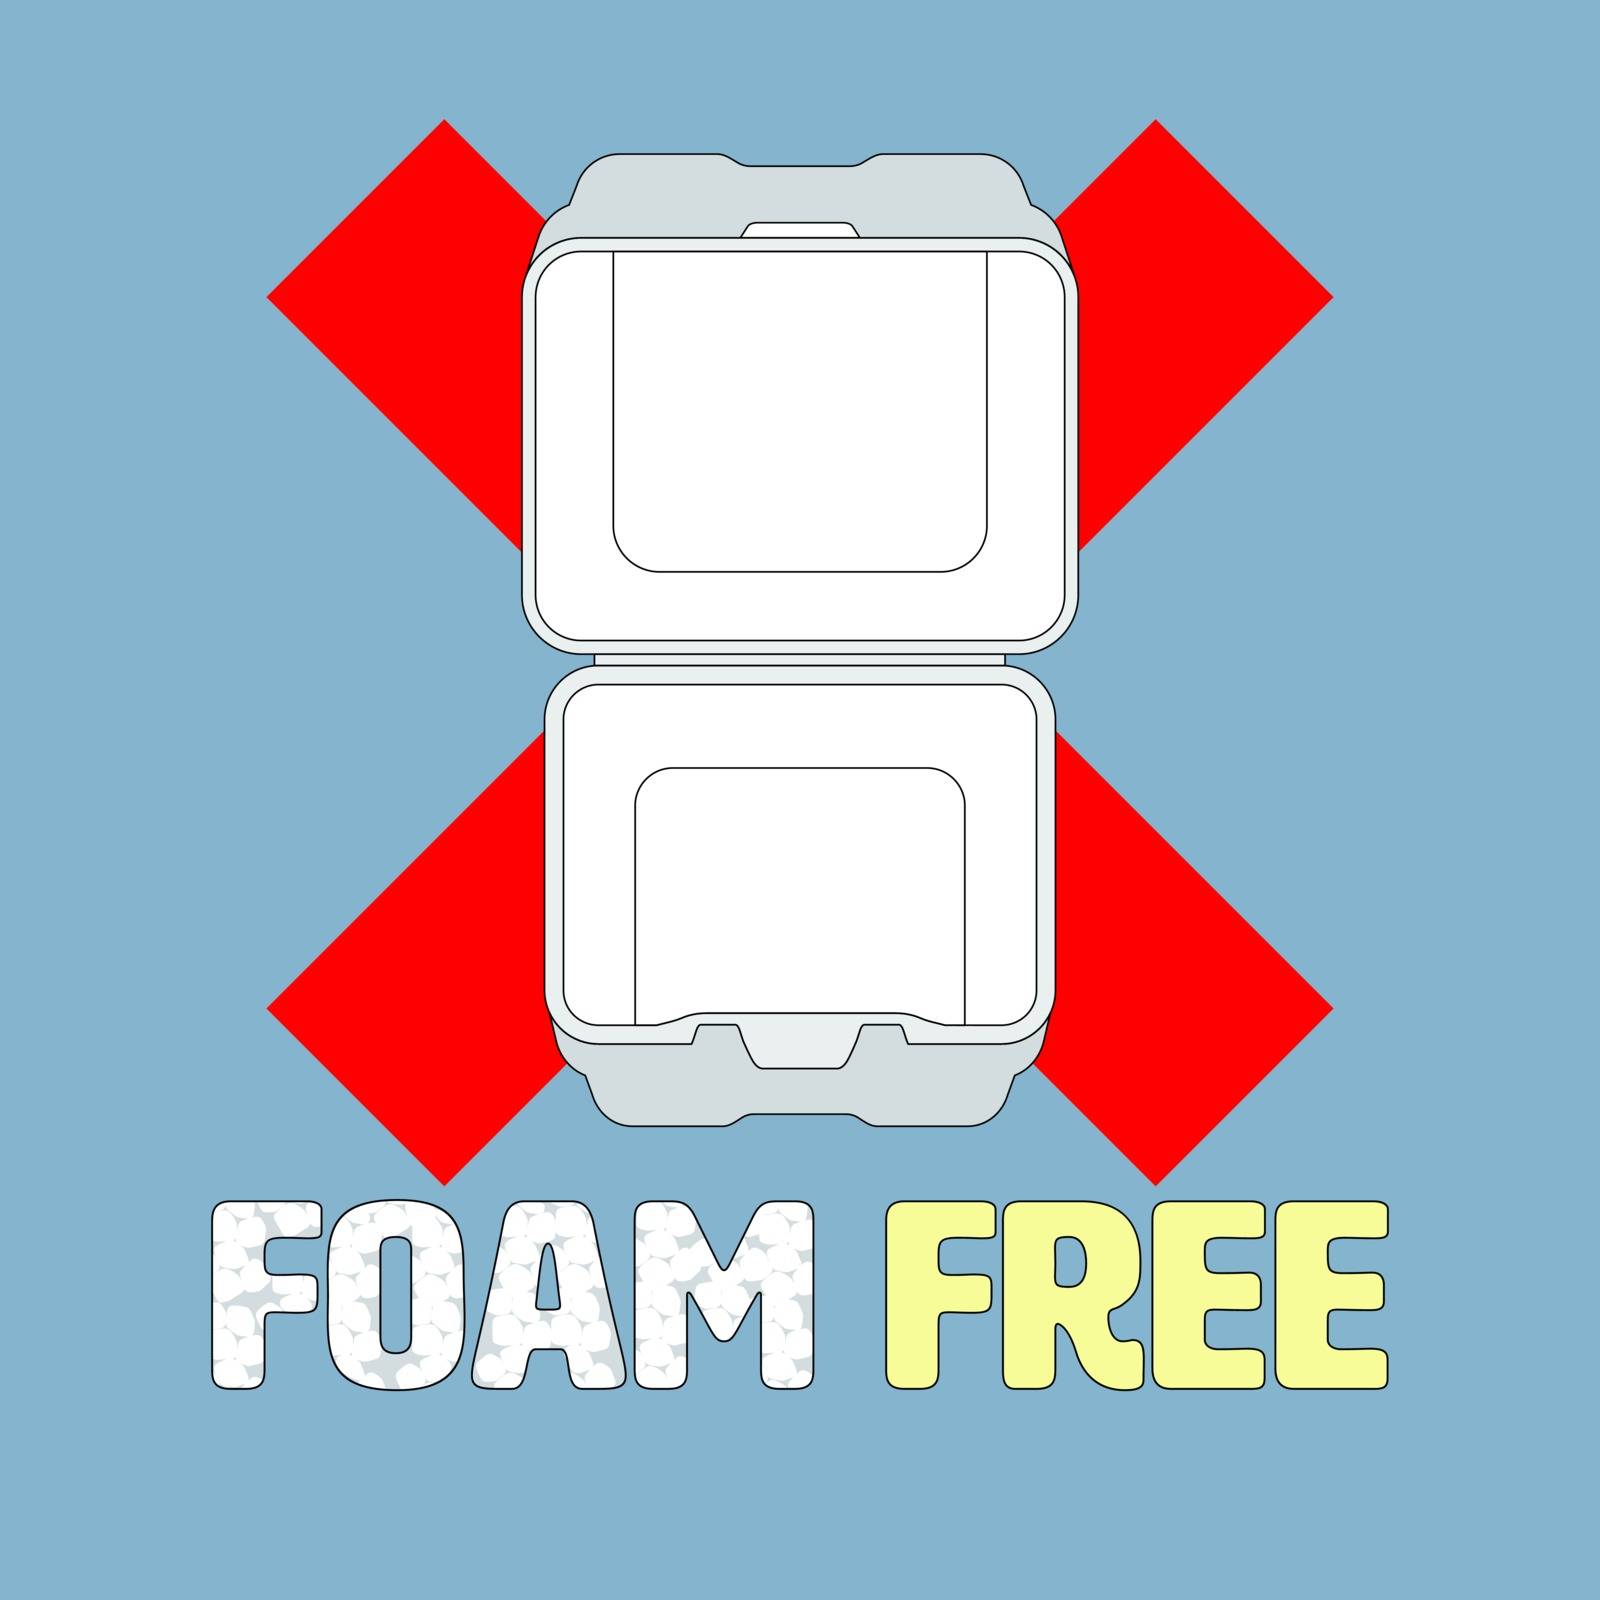 Ban cross symbol and outline flat icon of styrofoam container with foam beads typographic design. Foam free concept. Vector illustration.